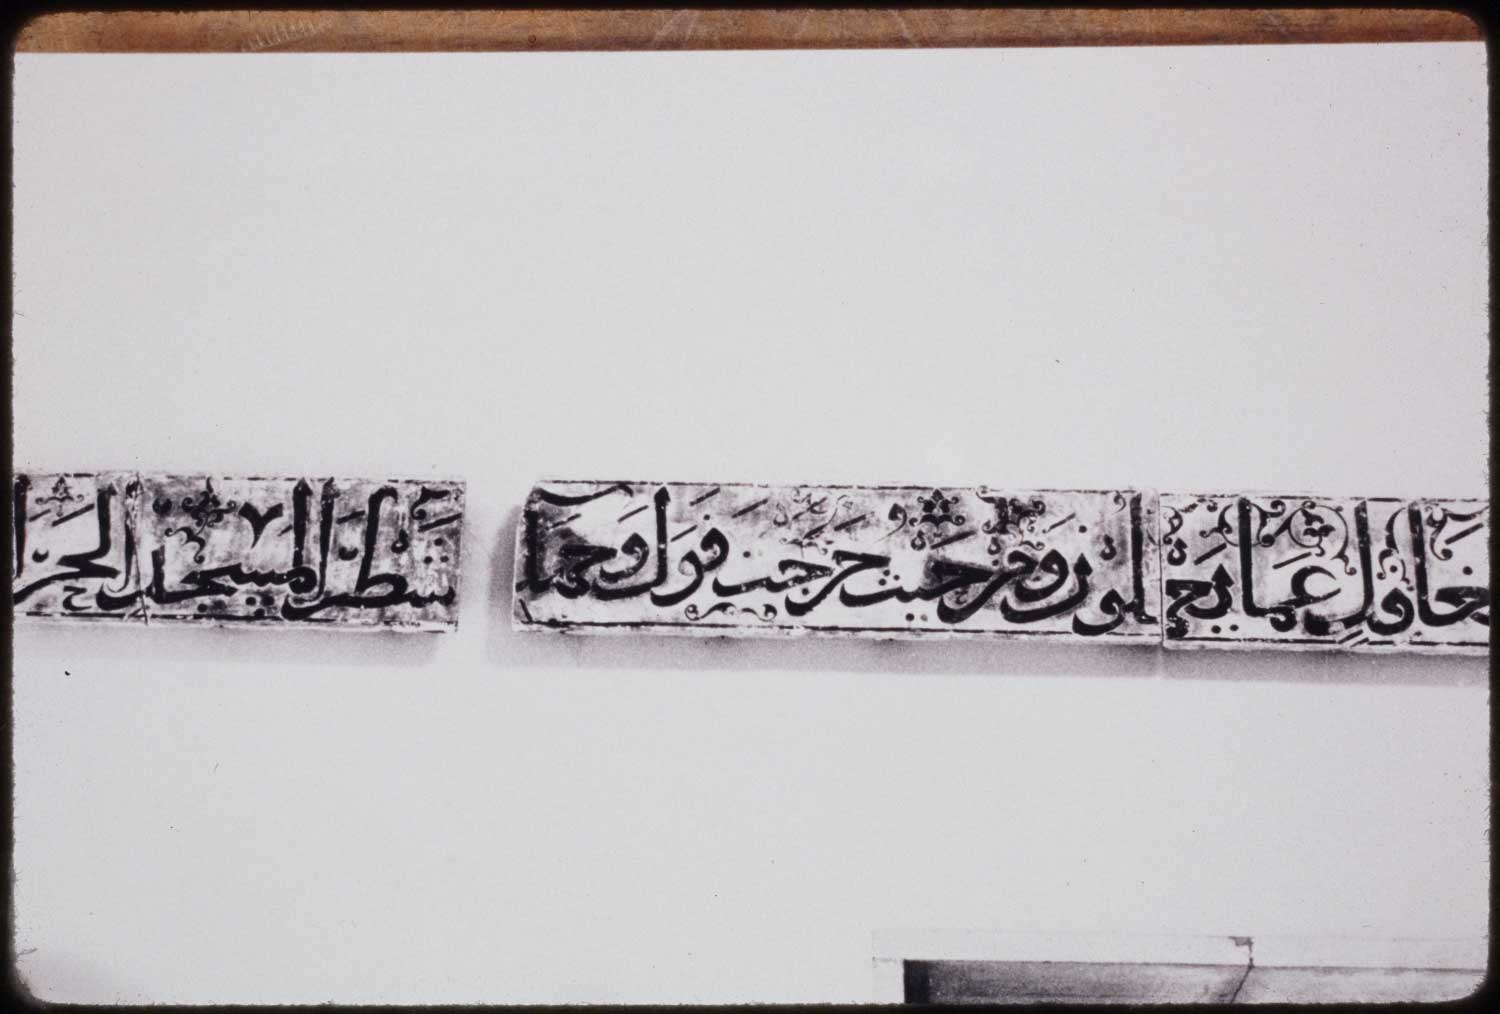 Inscriptions in Arabic from the mosque, installed in the National Museum of Iraq in Baghdad.